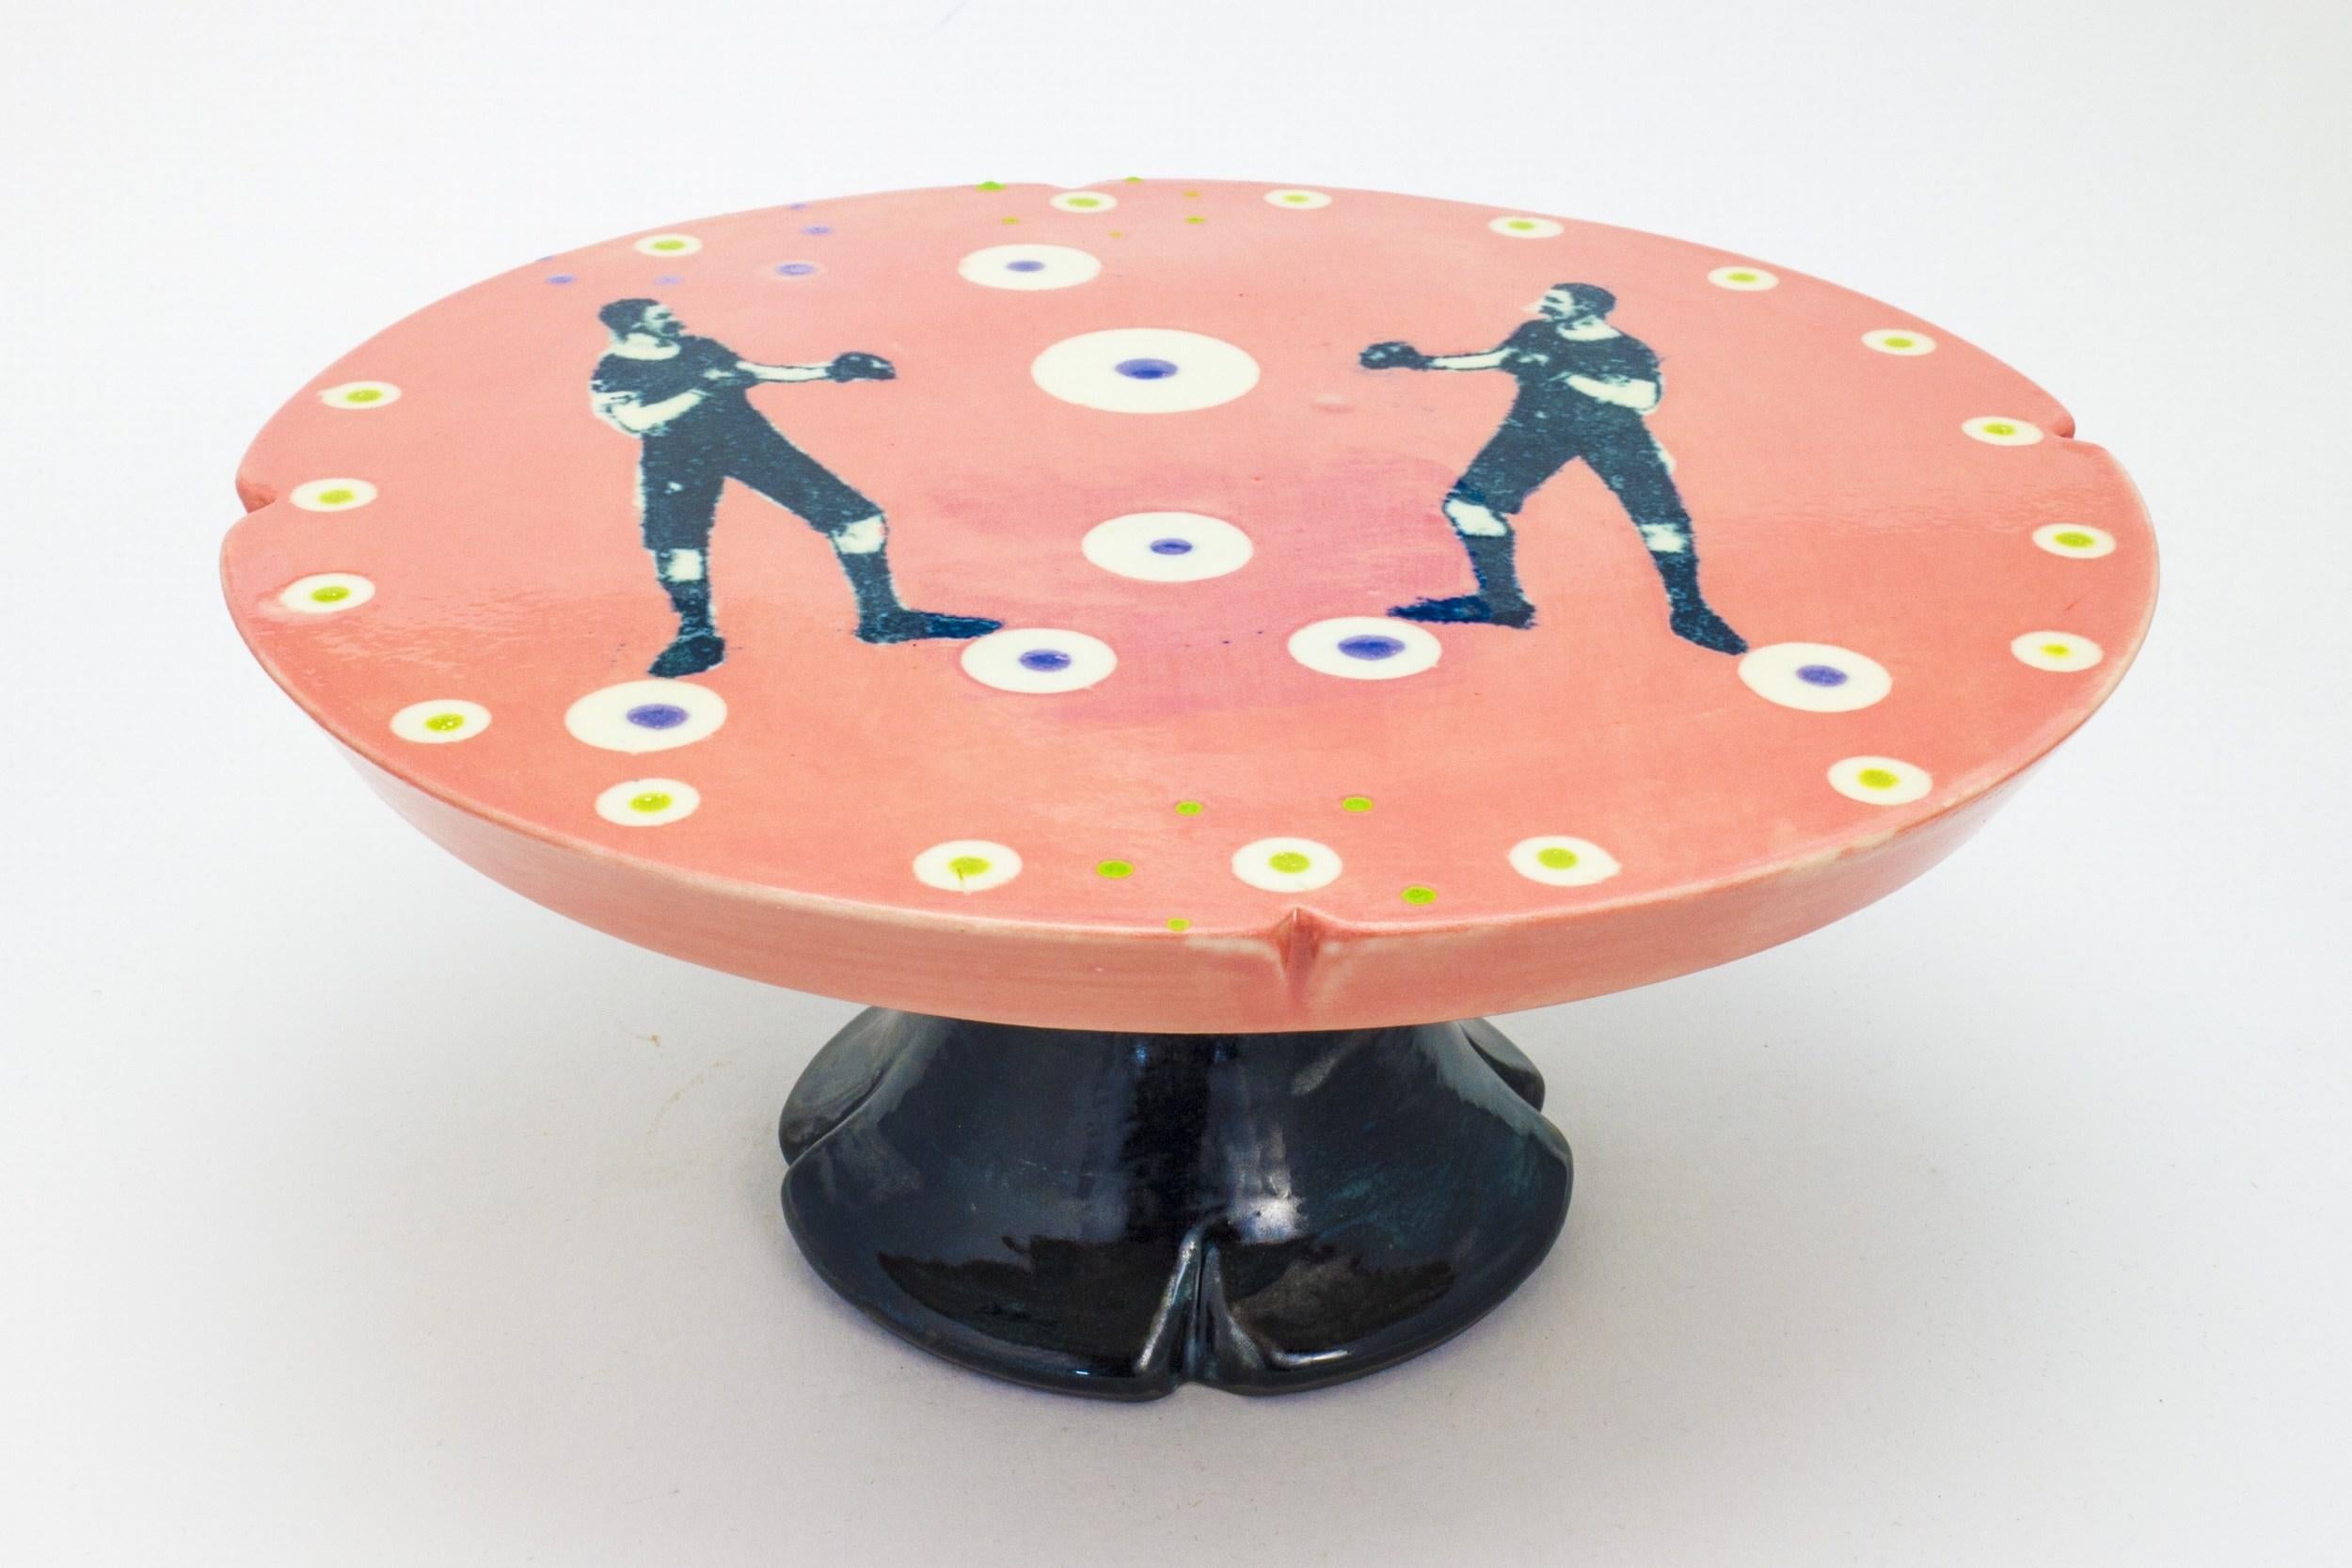 Lithograph printed cake pedestal - Sculpture by Theresa Robinson